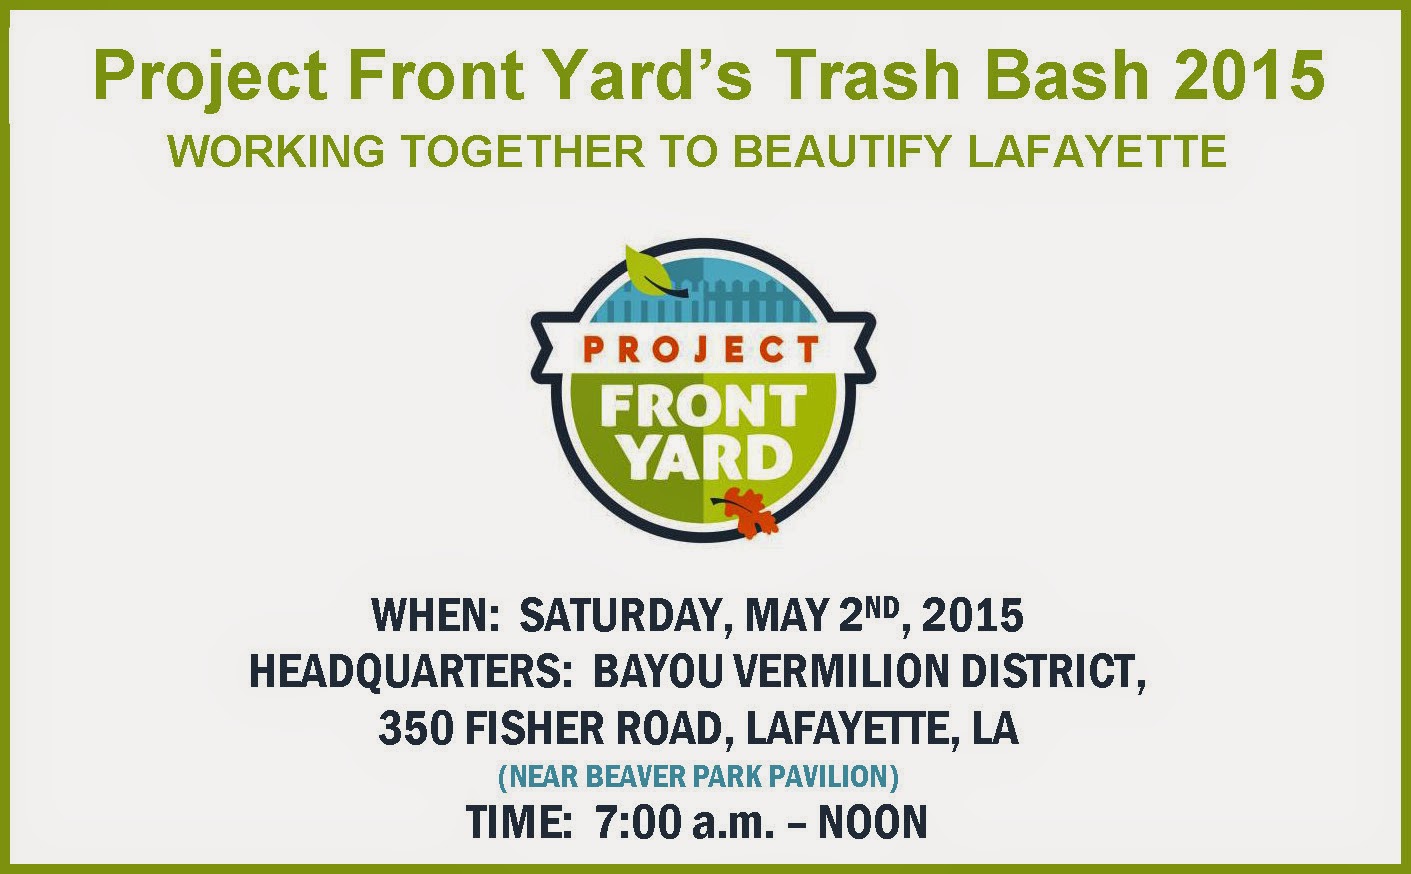 https://www.eventbrite.com/e/project-front-yards-trash-bash-2015-tickets-16003504914